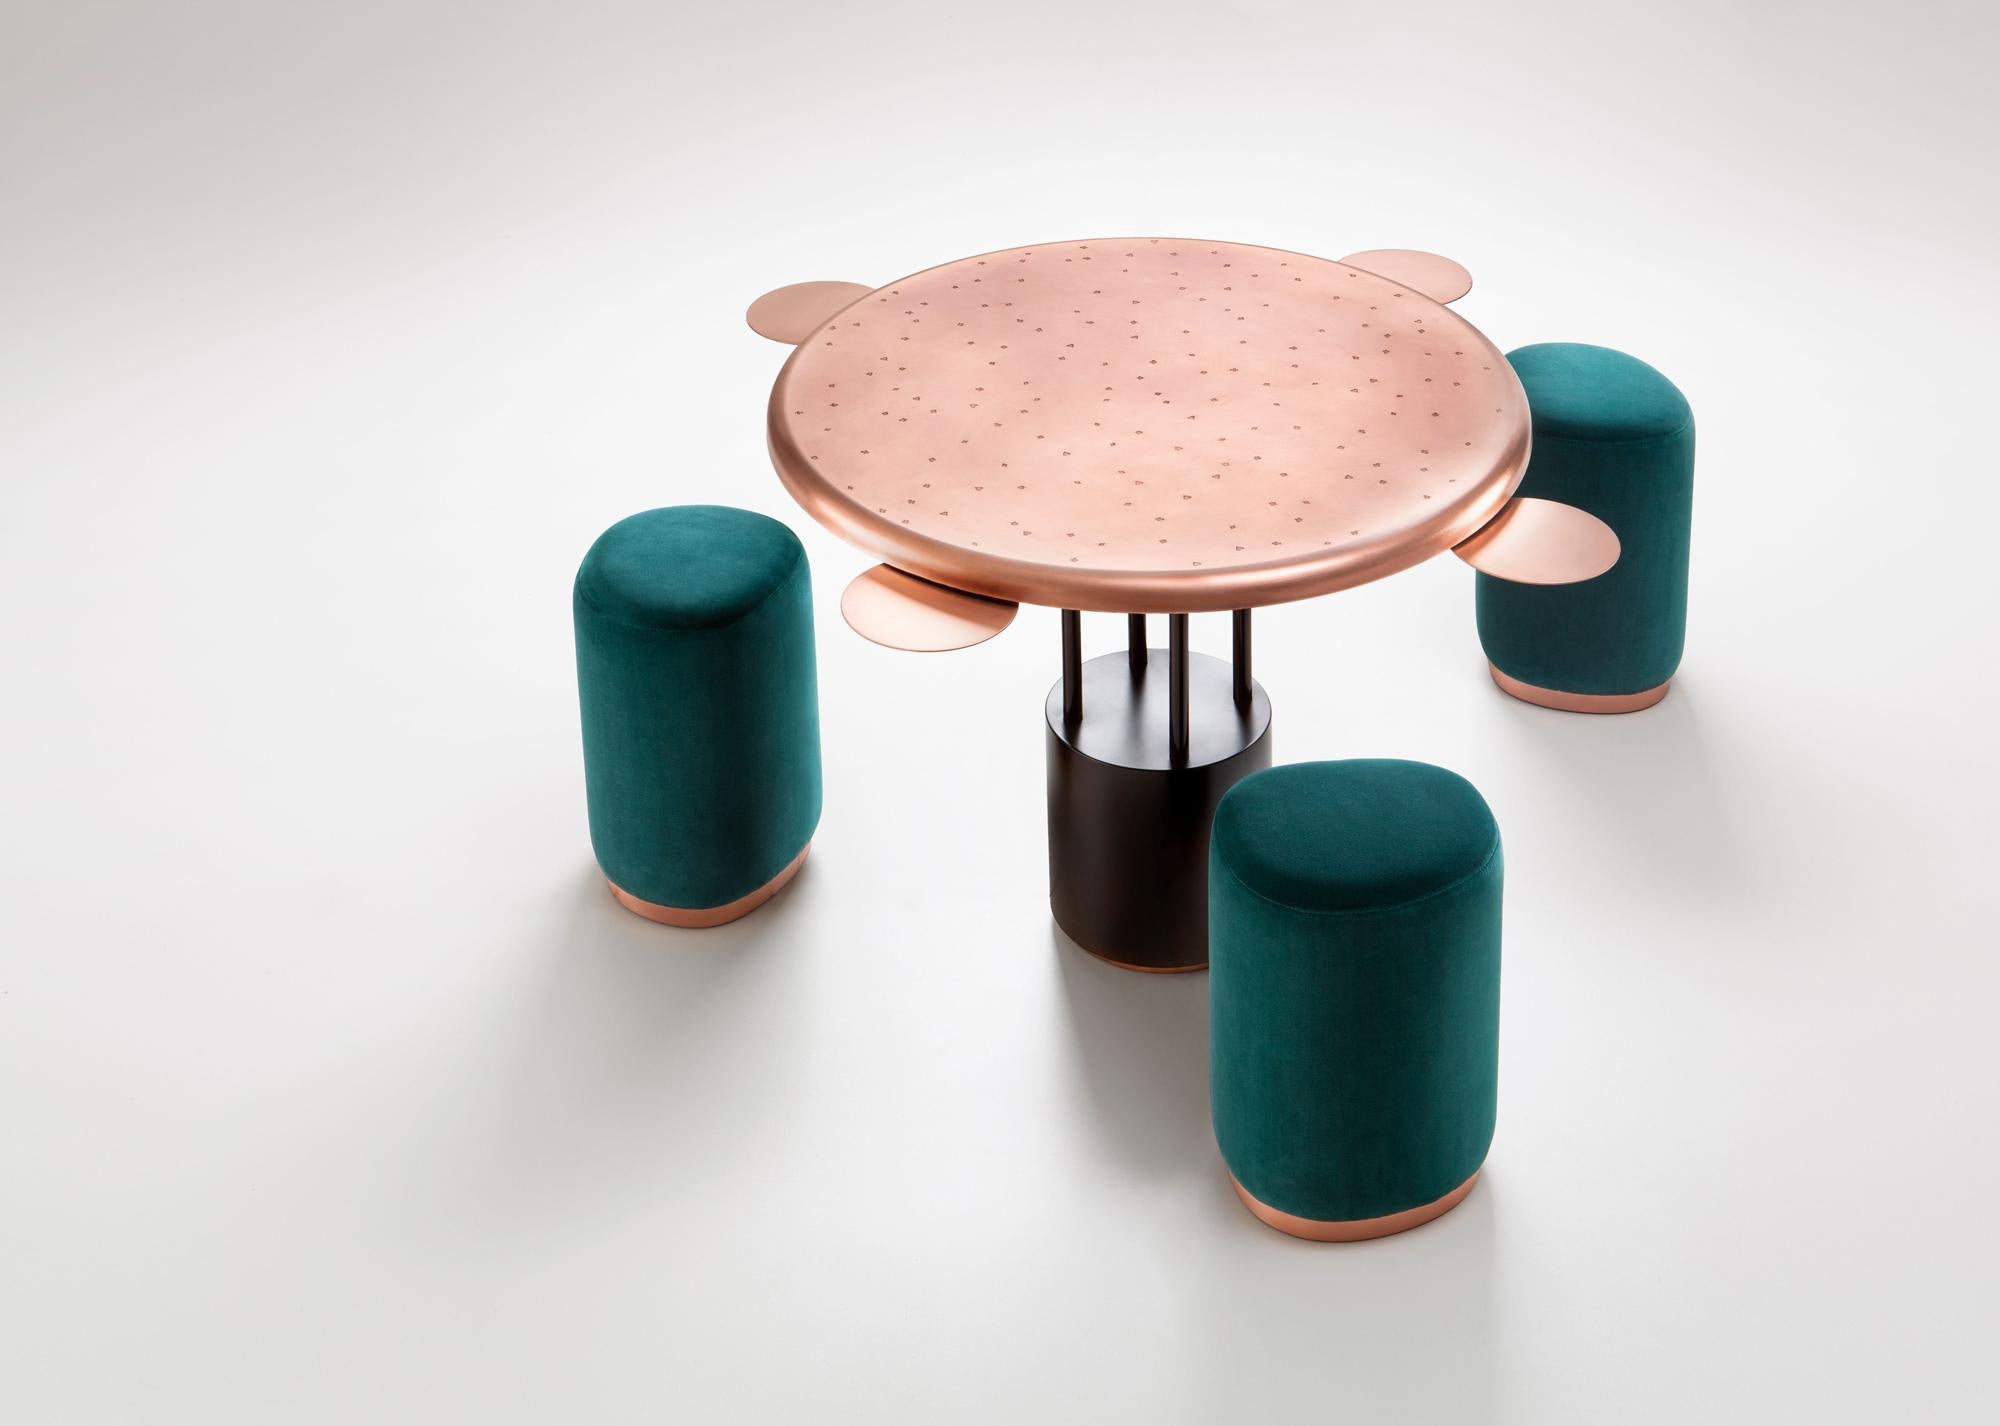 Burraco Game Table designed by Zanellato/Bortotto for DeCastelli. The DeErosion technique is used for producing the natural fire-treated copper at the top. Four circular copper plates are attached in the different corners for placing playing cards